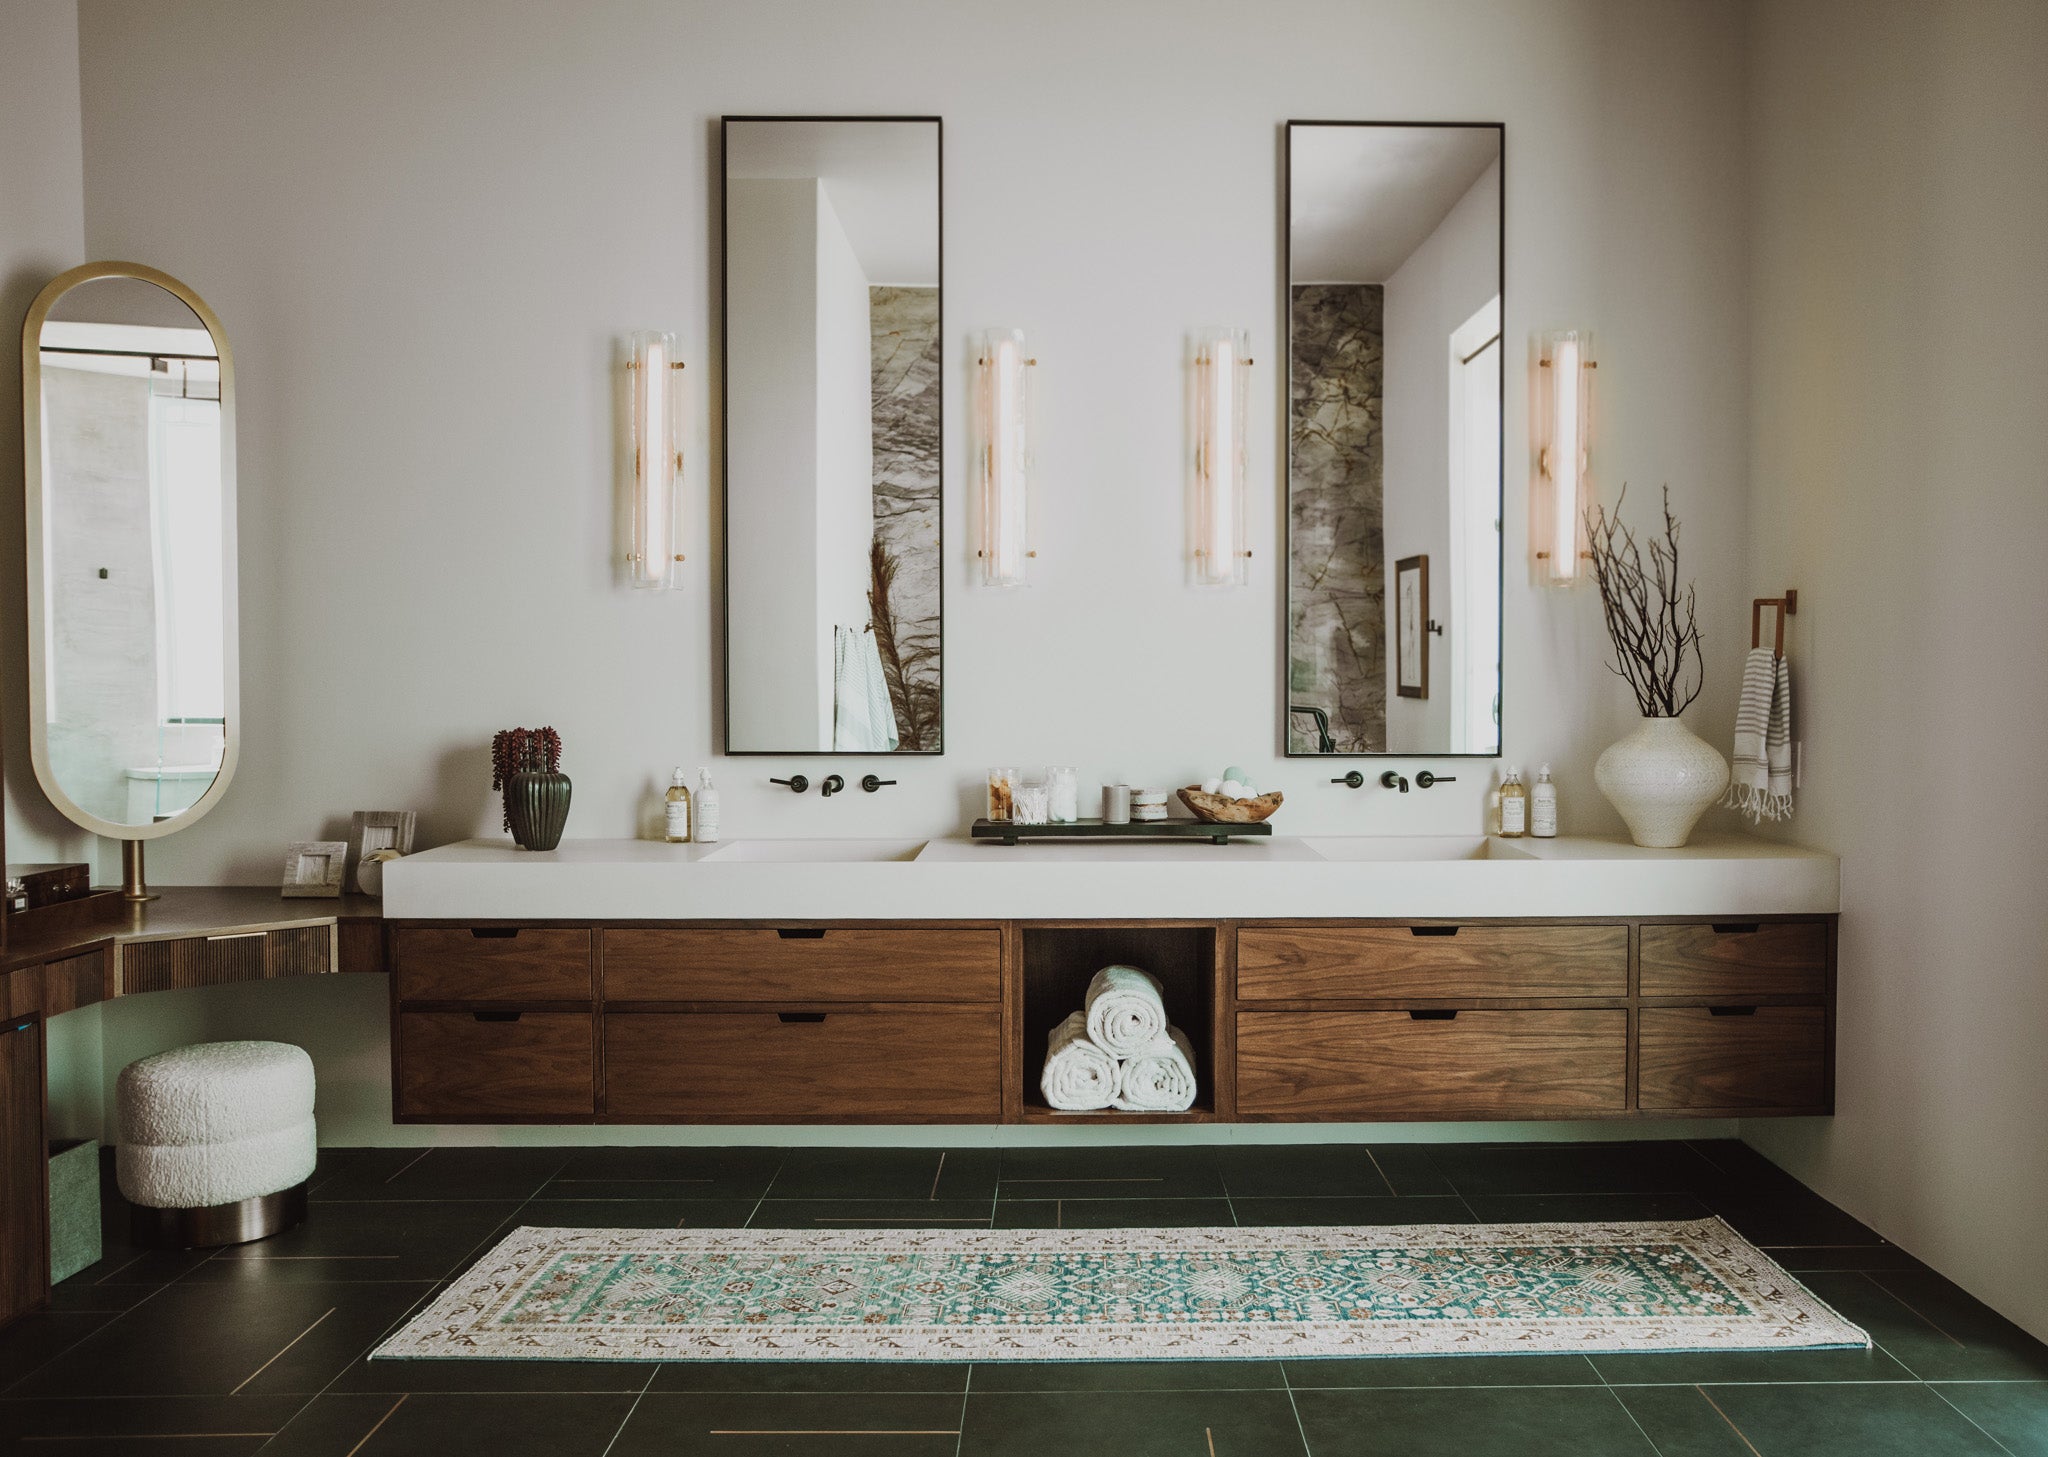 Simply Sam + Simply Elevated Home Furnishing bathroom remodel and decor staging.